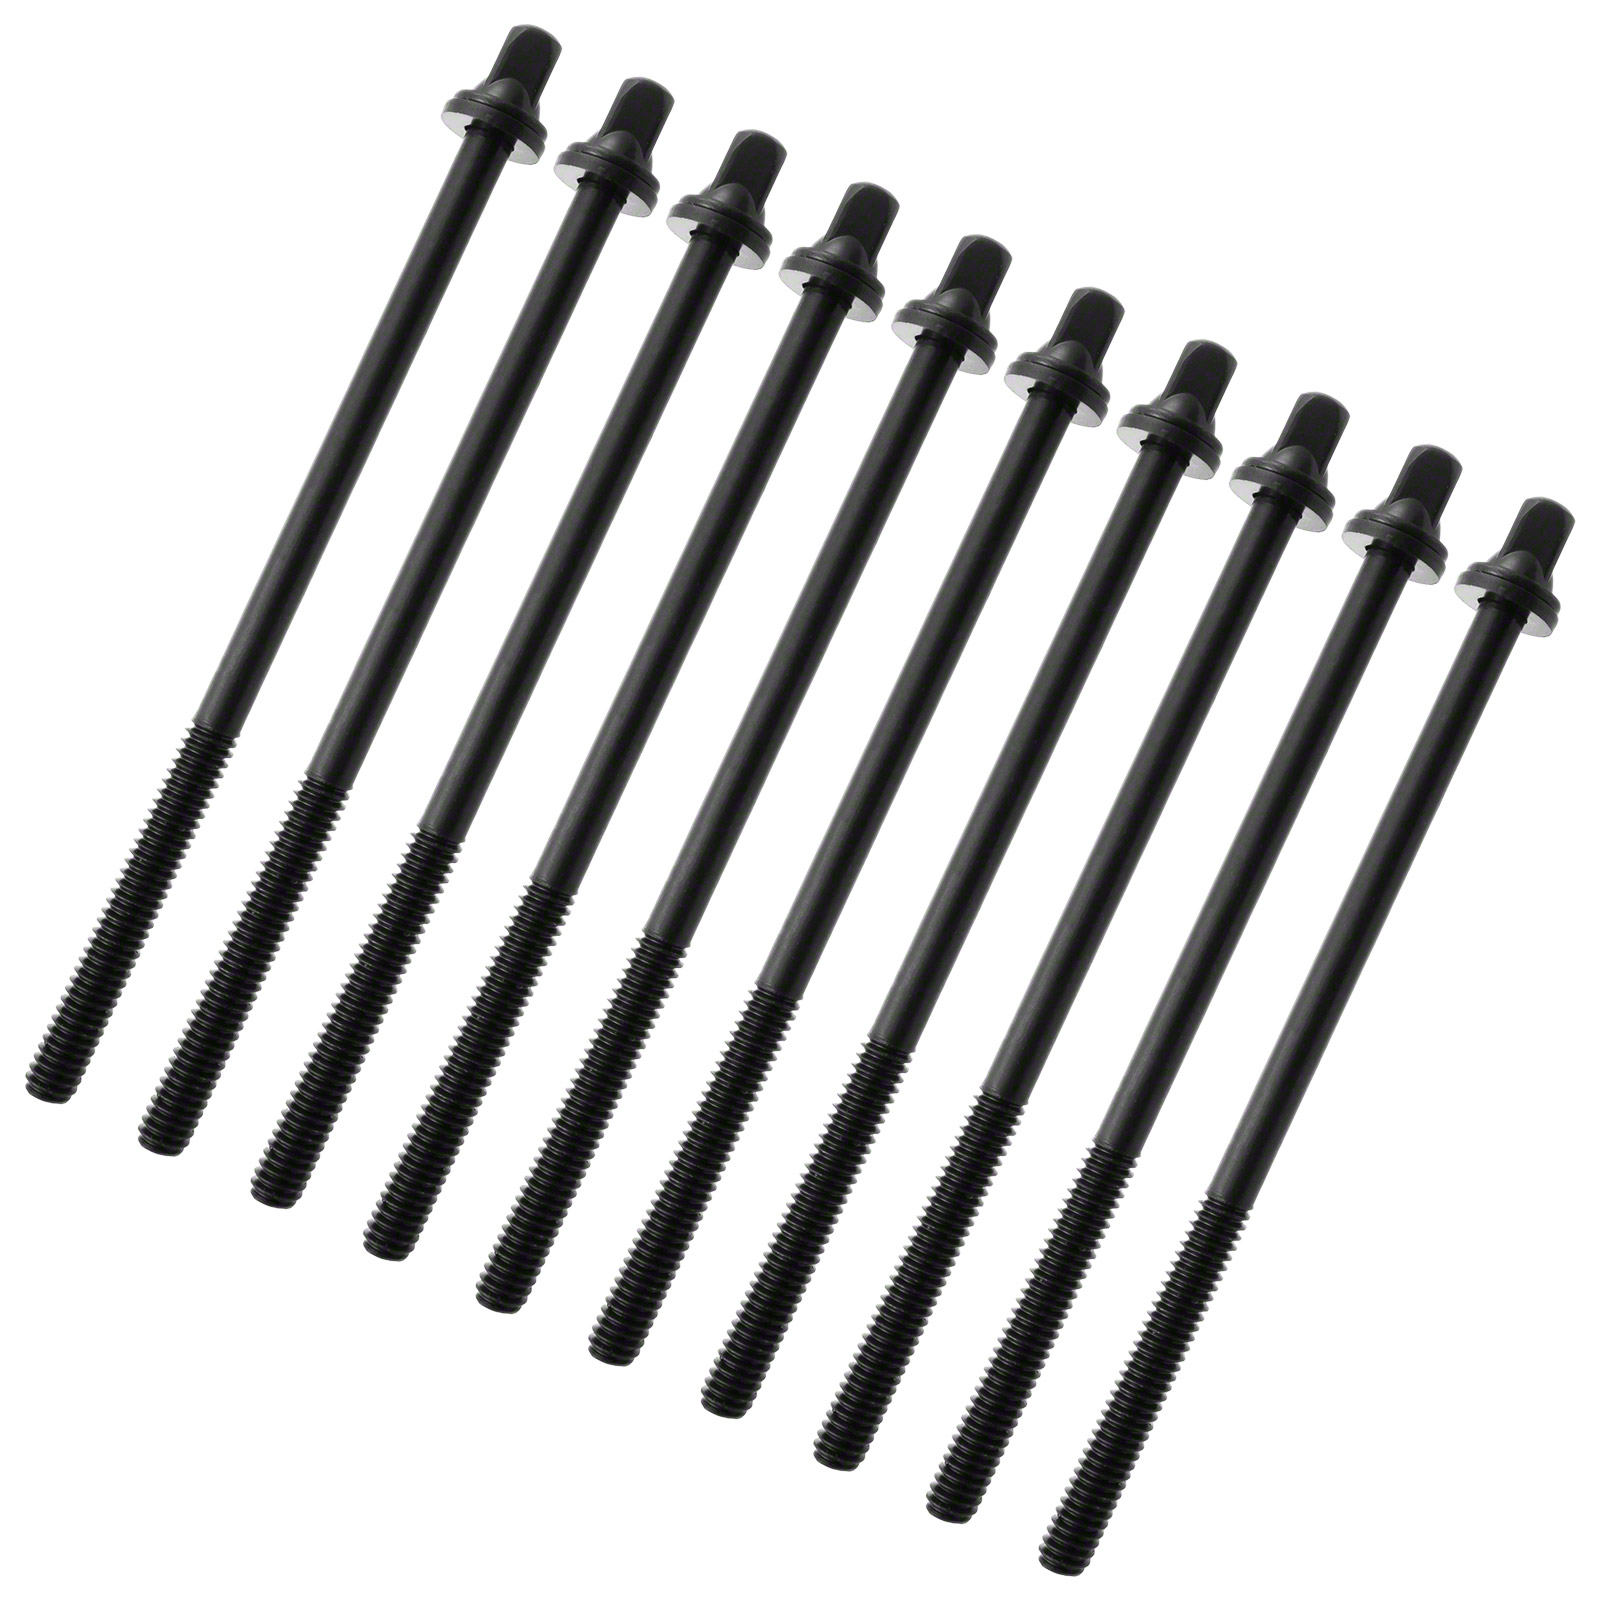 SPAREDRUM TRC-102W-BK - 102MM TENSION ROD BLACK WITH WASHER - 7/32